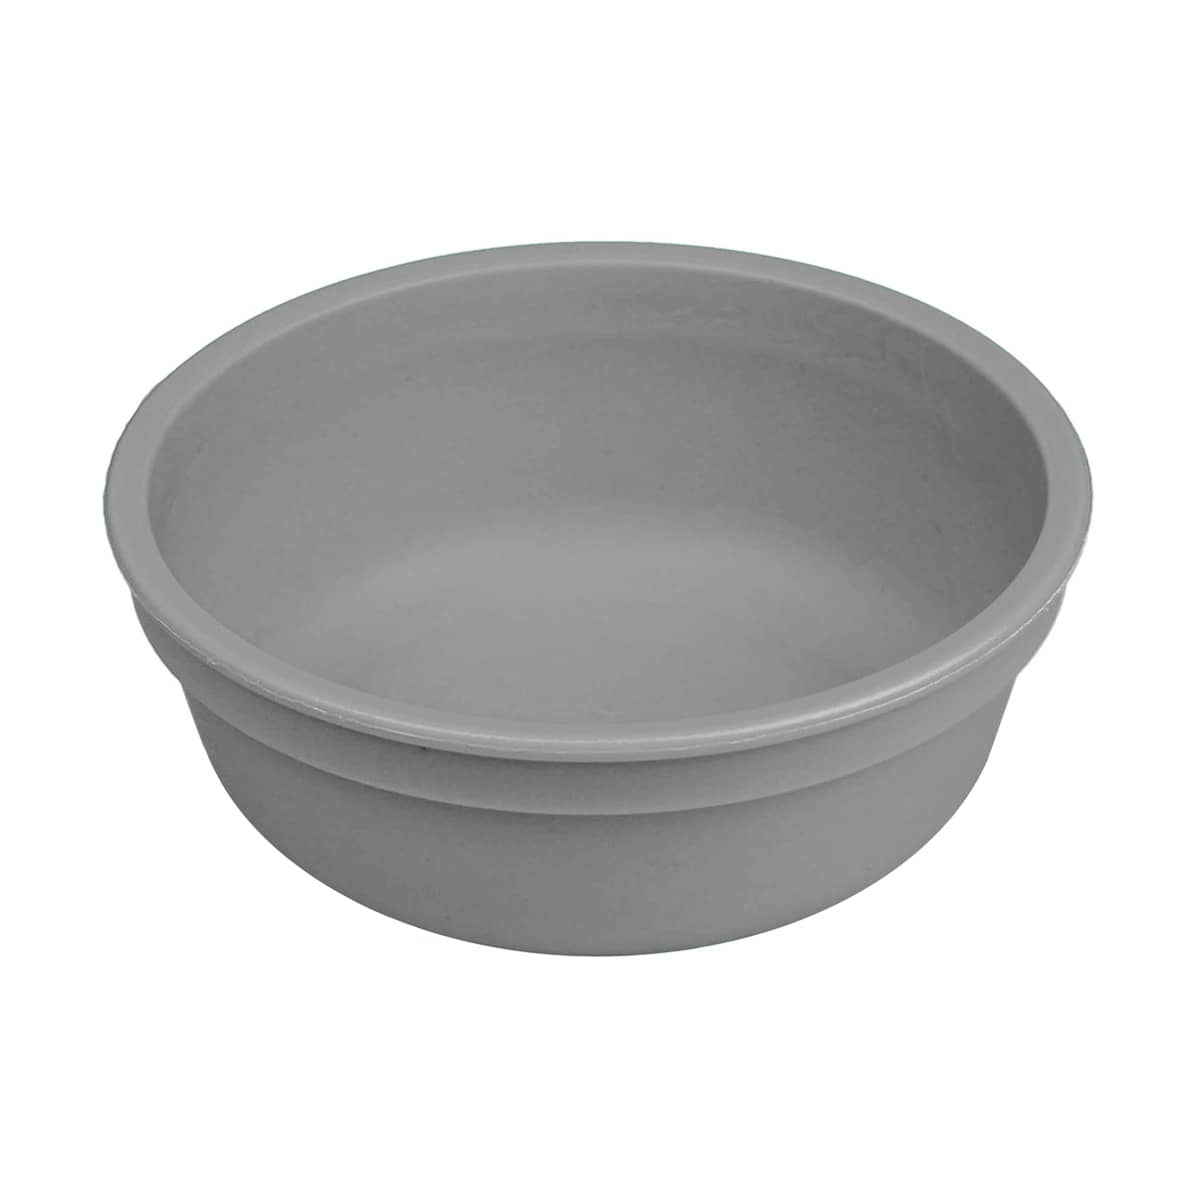 Re-Play Recycled Bowl - Grey